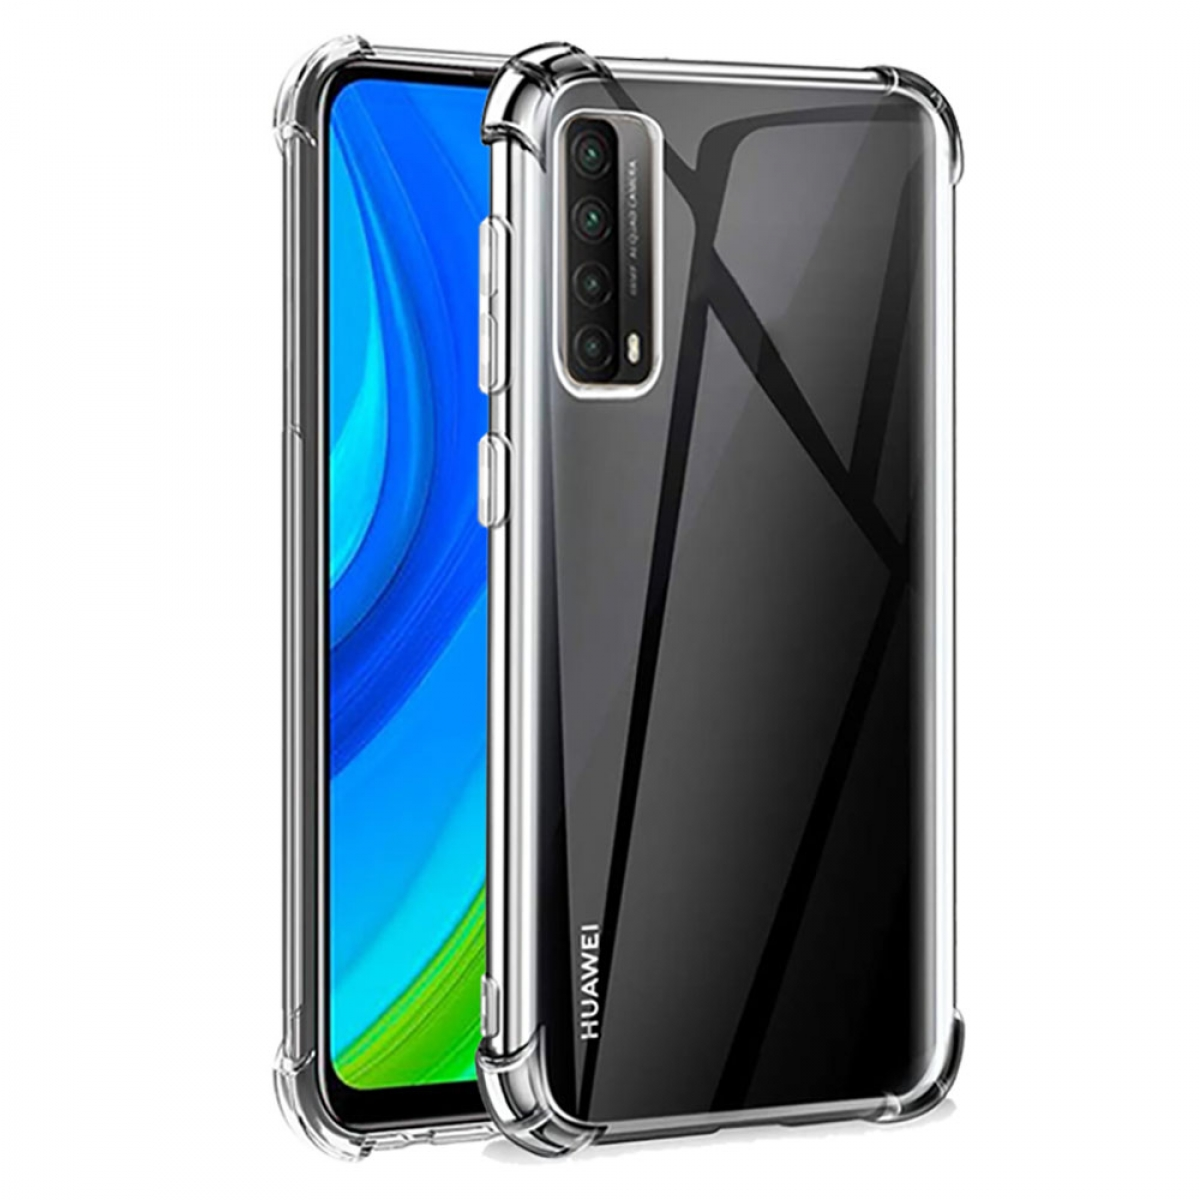 Backcover, Multicolor P CASEONLINE Shockproof, Huawei, Smart 2021,